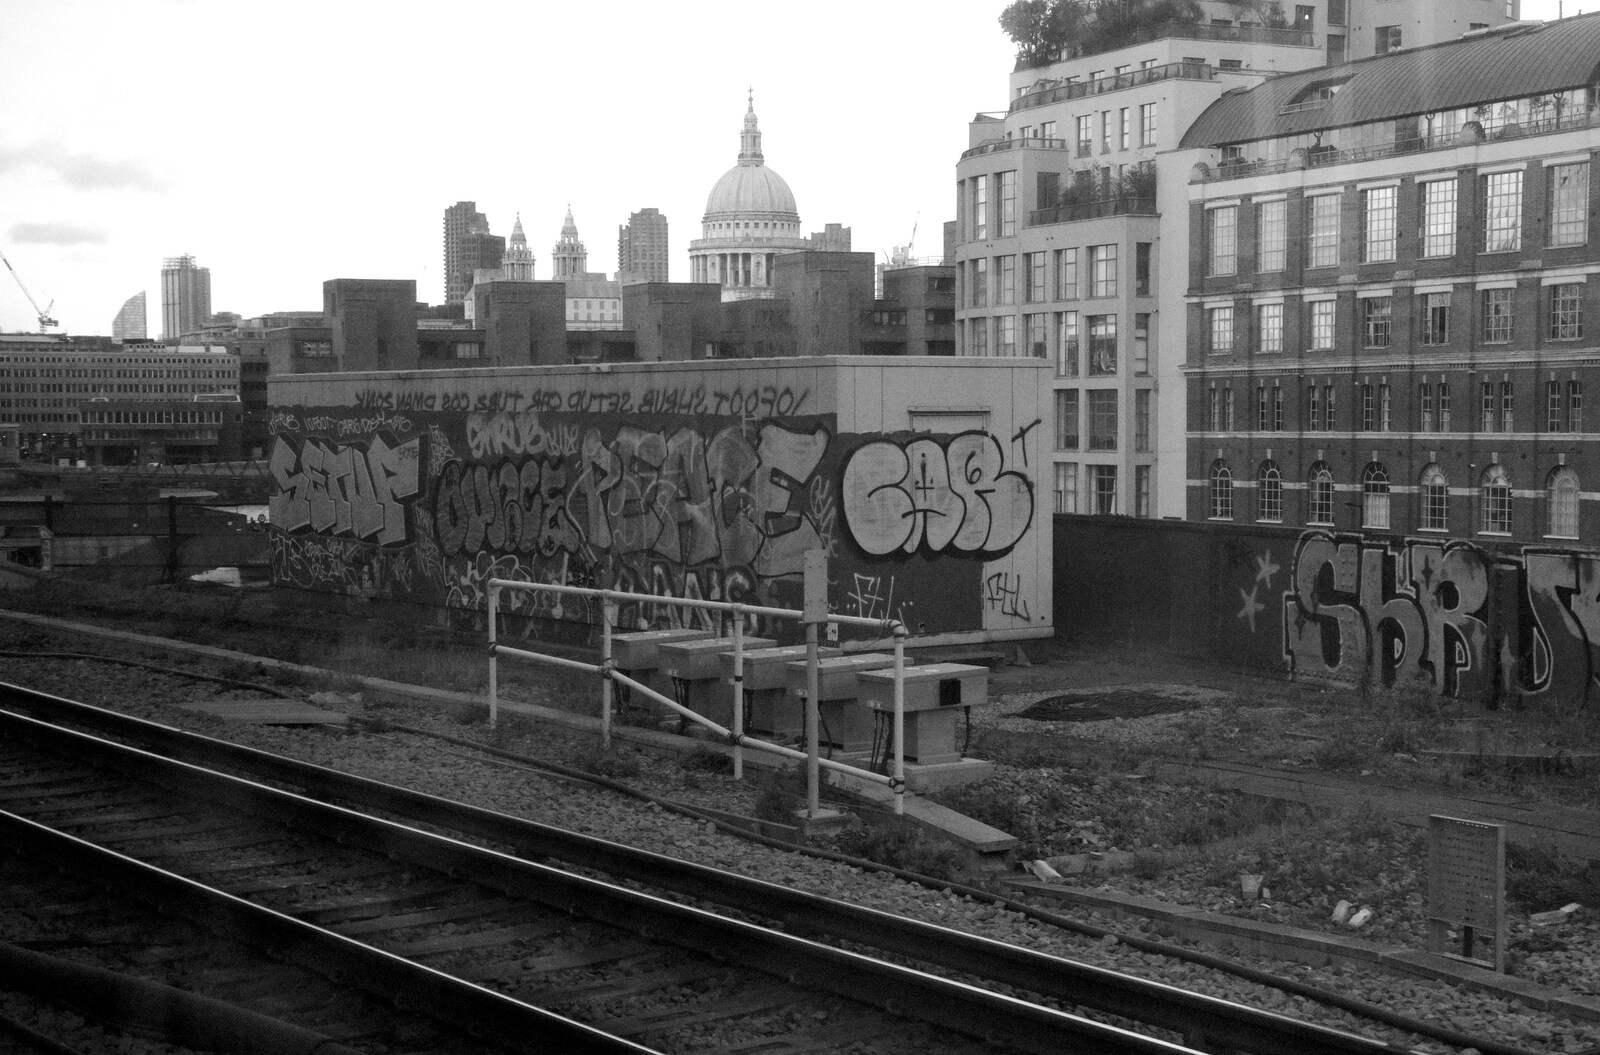 Urban graffiti, and St. Paul's Cathedral from HMS Belfast and the South Bank, Southwark, London - 17th February 2020